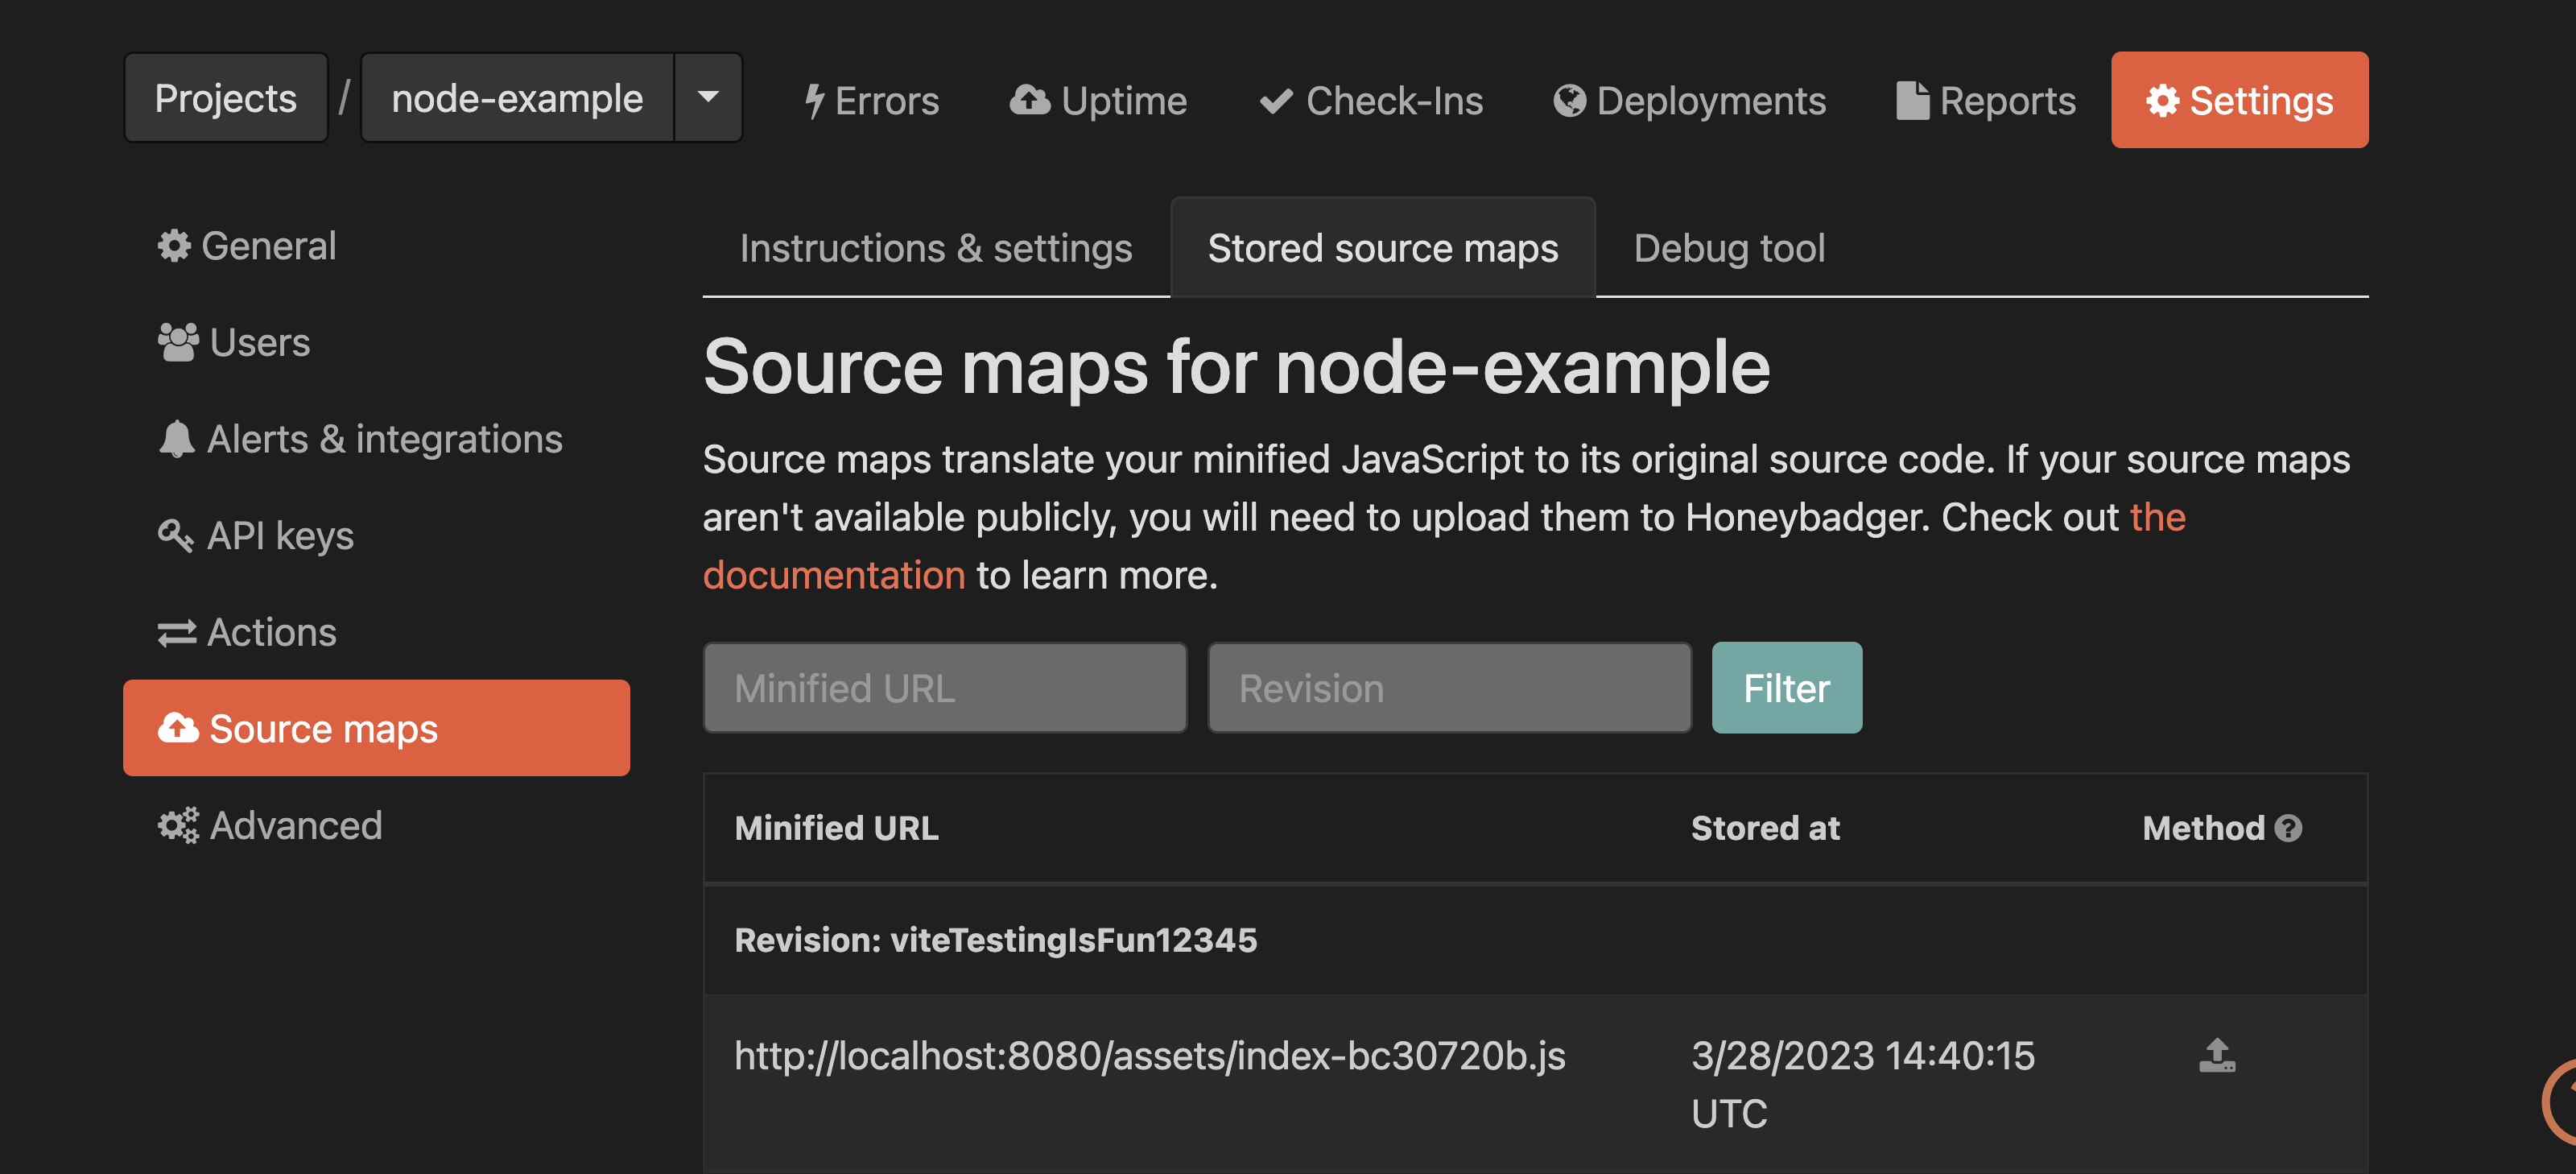 Honeybadger app: Stored source maps page